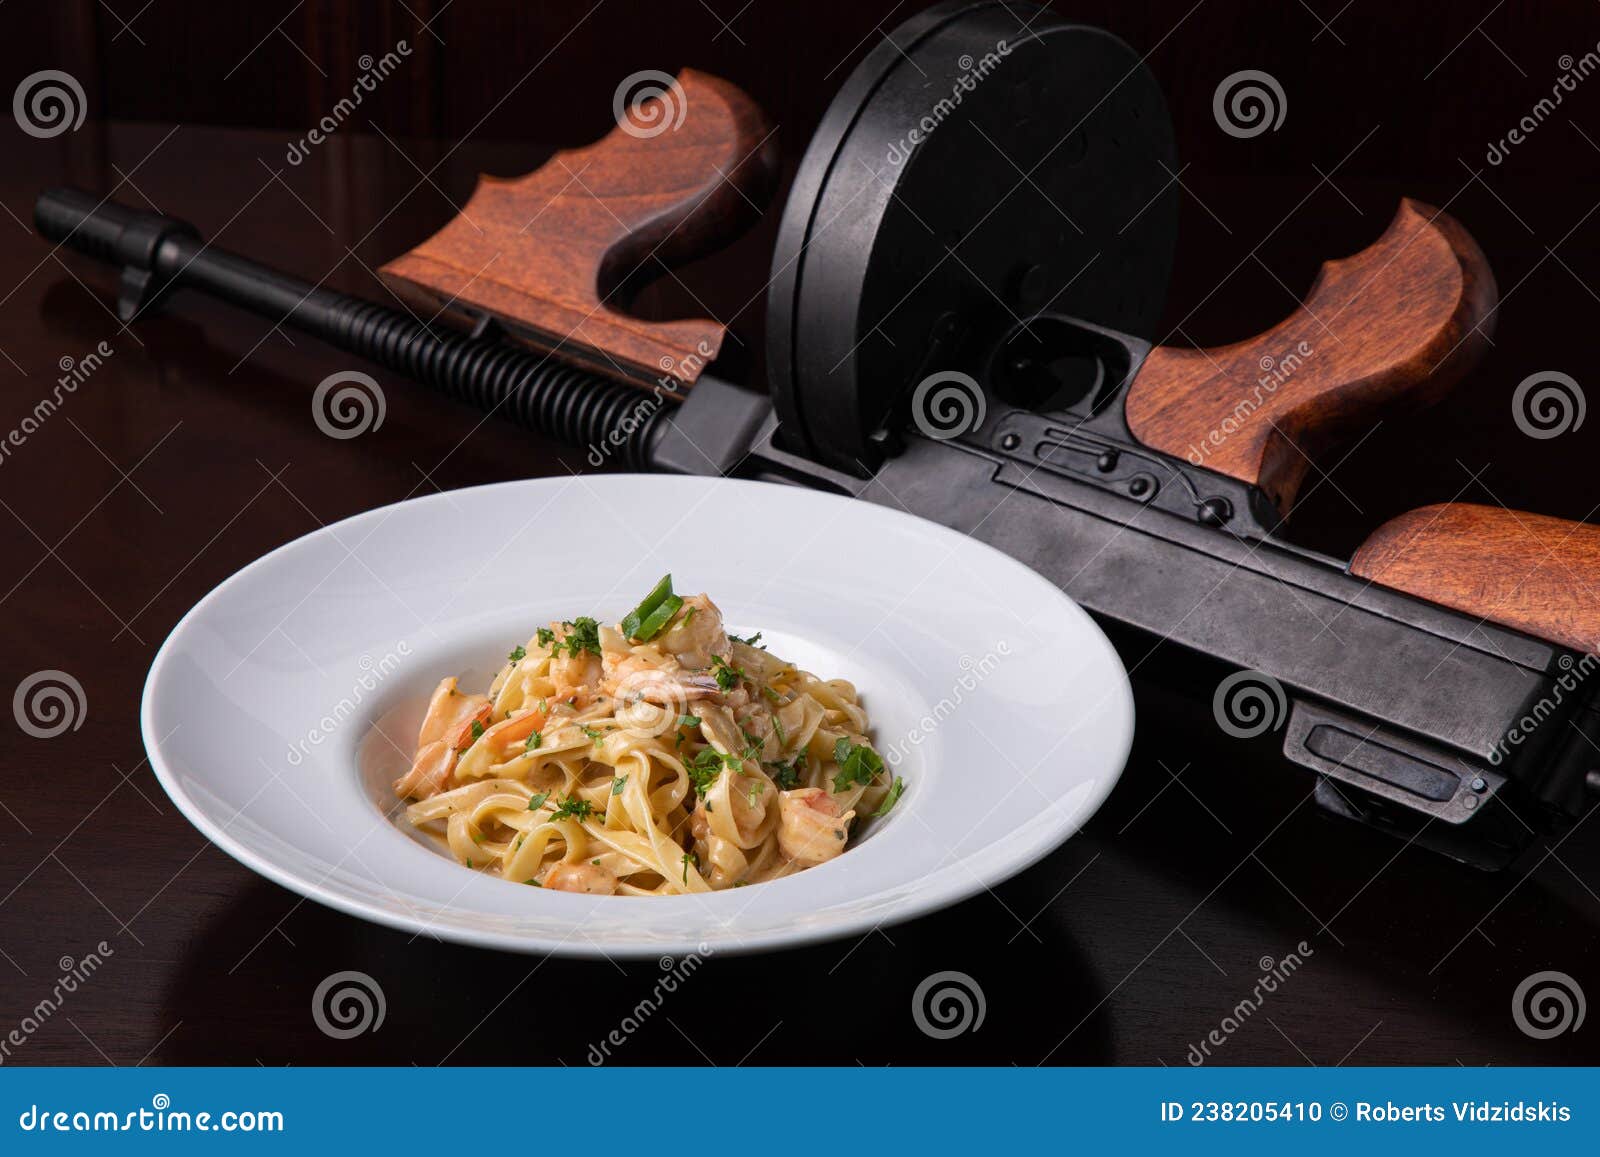 Thompson Submachine Gun and Italian Pasta with Prawns Chili Pepper and  Greens Stock Photo - Image of violence, bandit: 238205410